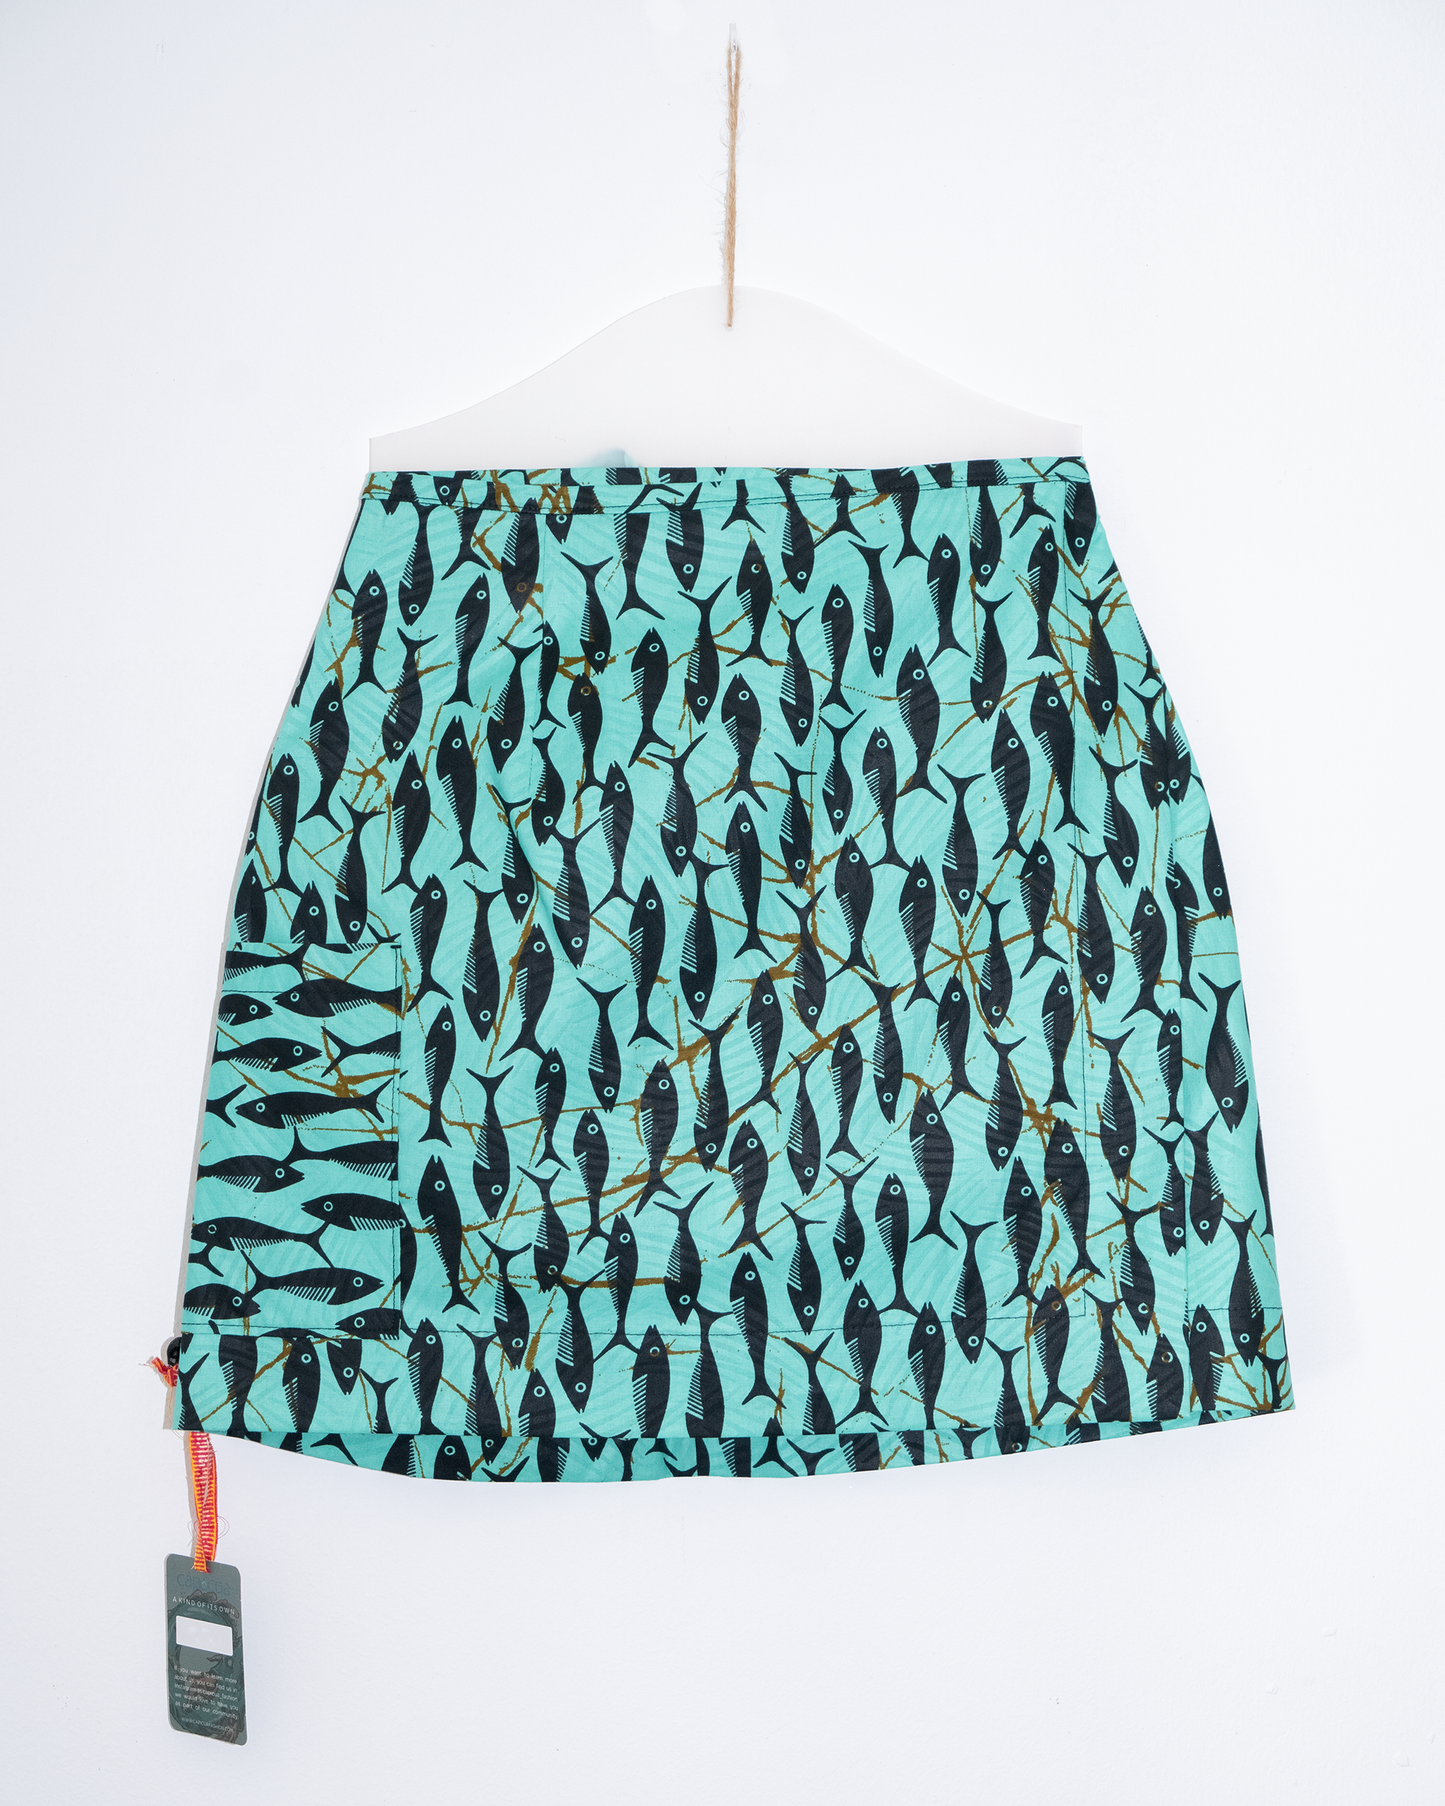 X Skirt in Fish in the sea